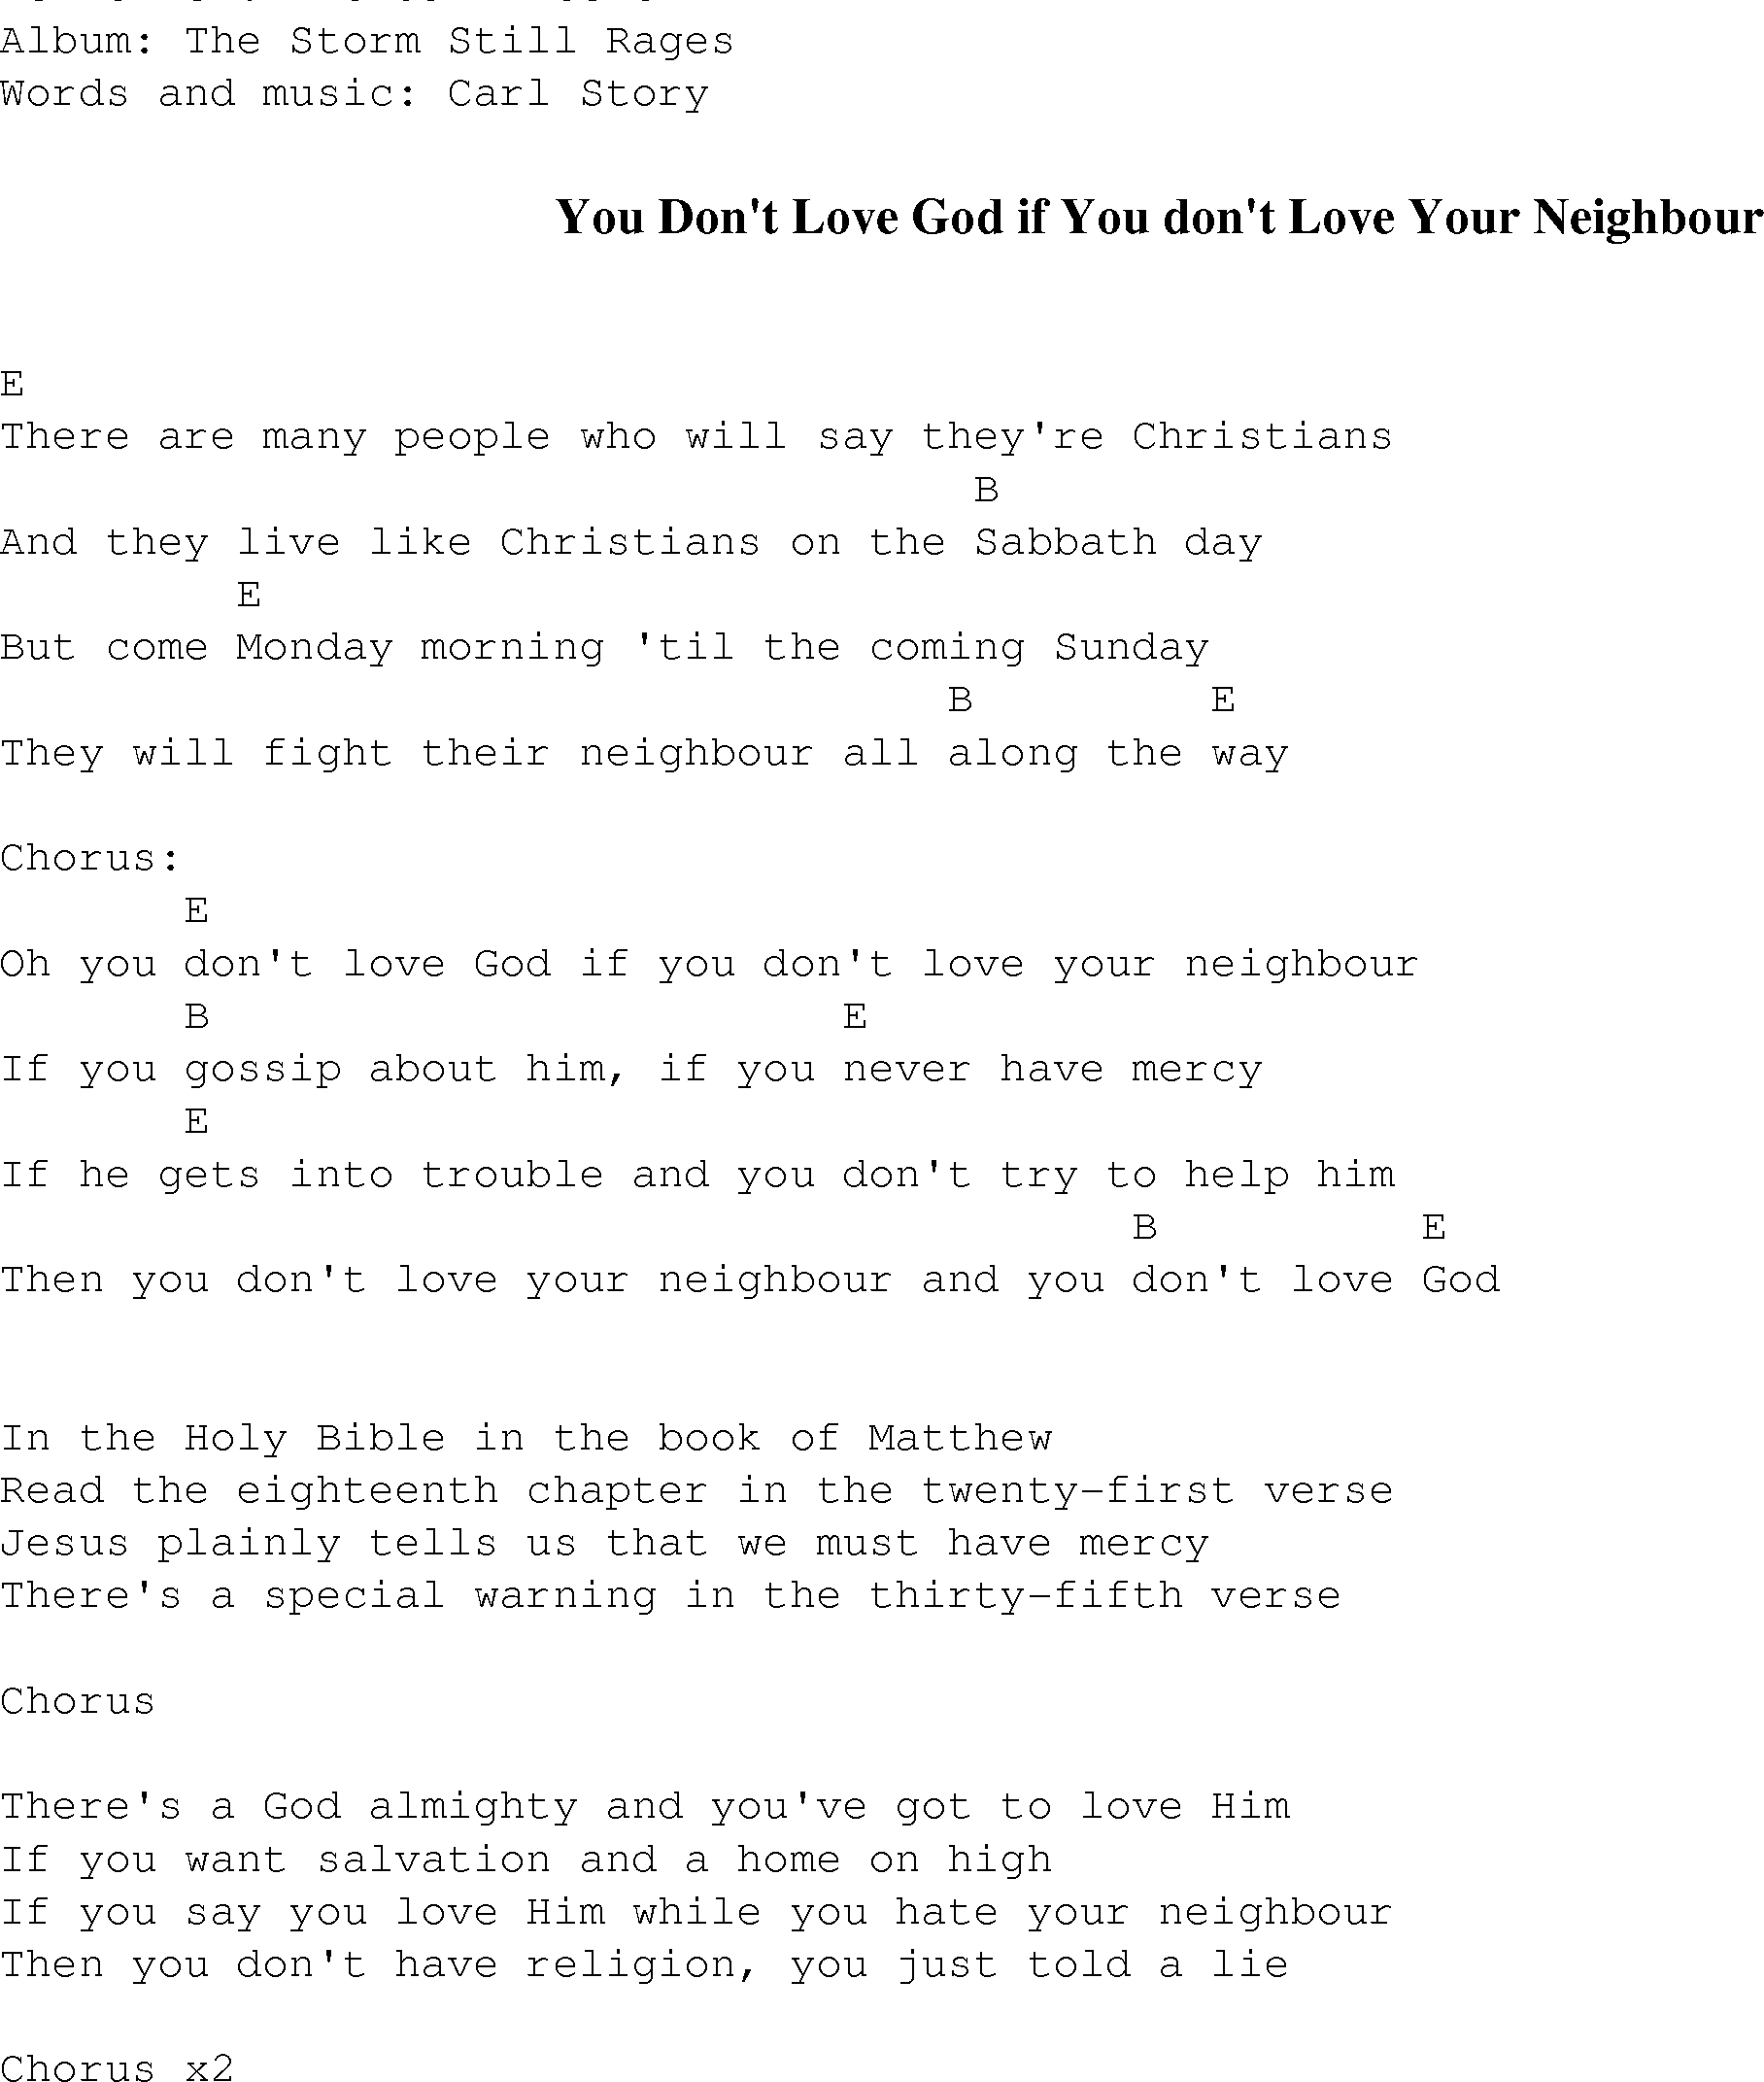 Gospel Song: you_dont_love_god_if_you_dont_love_your_neighbour, lyrics and chords.